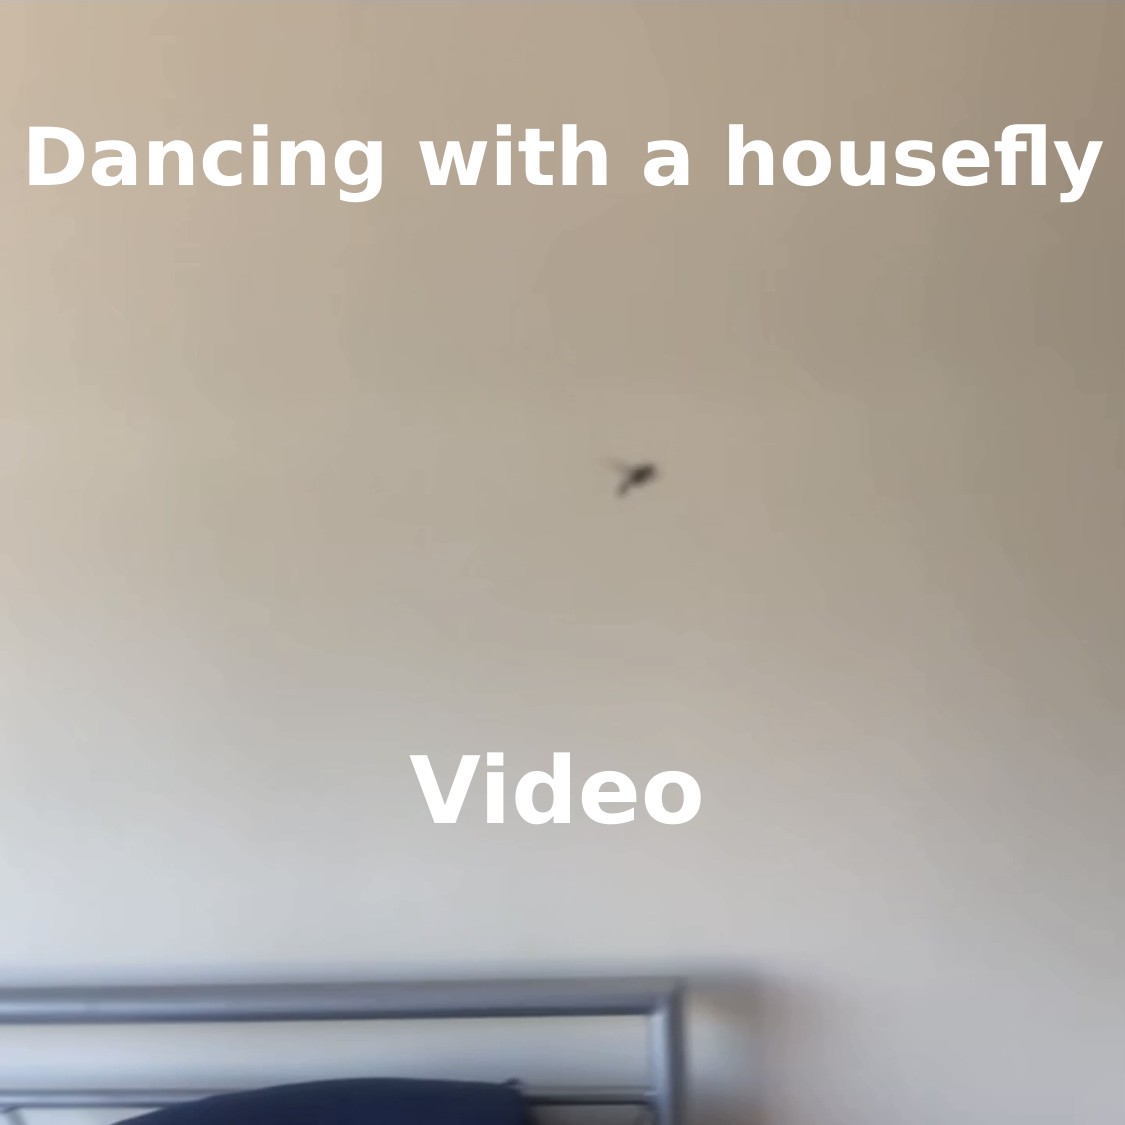 Housefly in mid-flight fairly close to the camera, with part of a bedframe in the background. The text 'dancing with a housefly' and 'video' are overtop of the image, a link to the video.